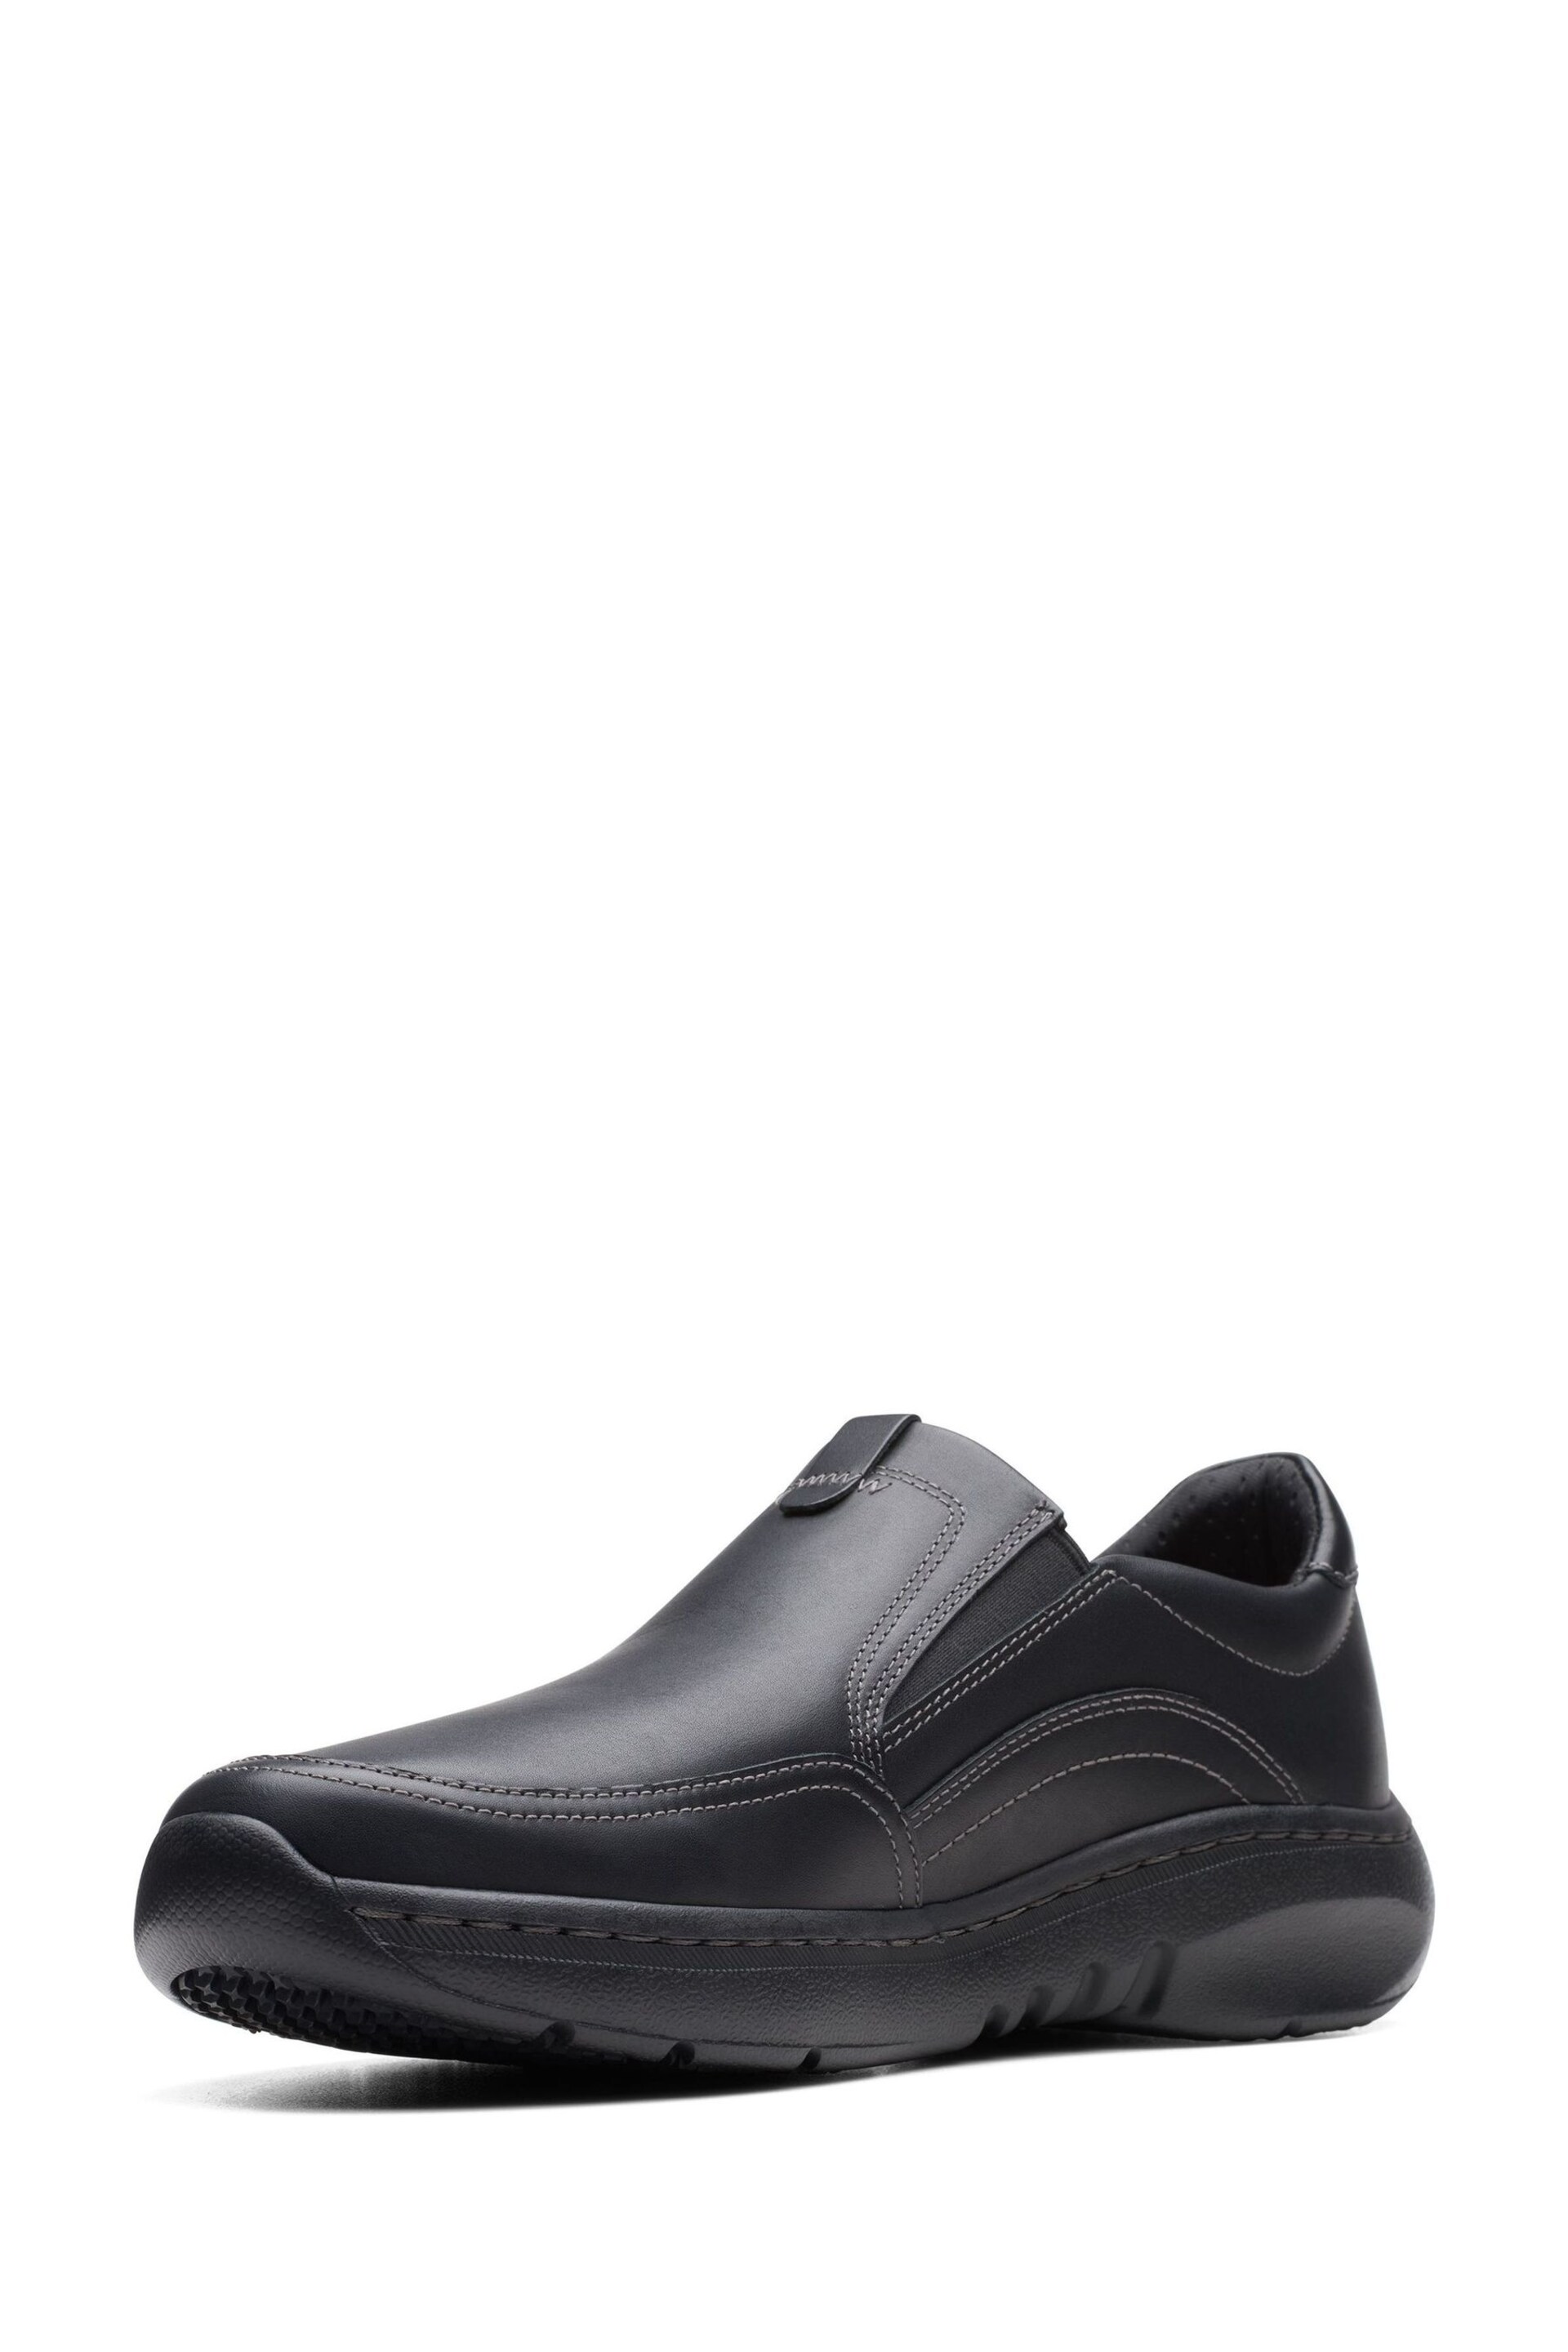 Clarks Black Leather ClarksPro Step Shoes - Image 4 of 7